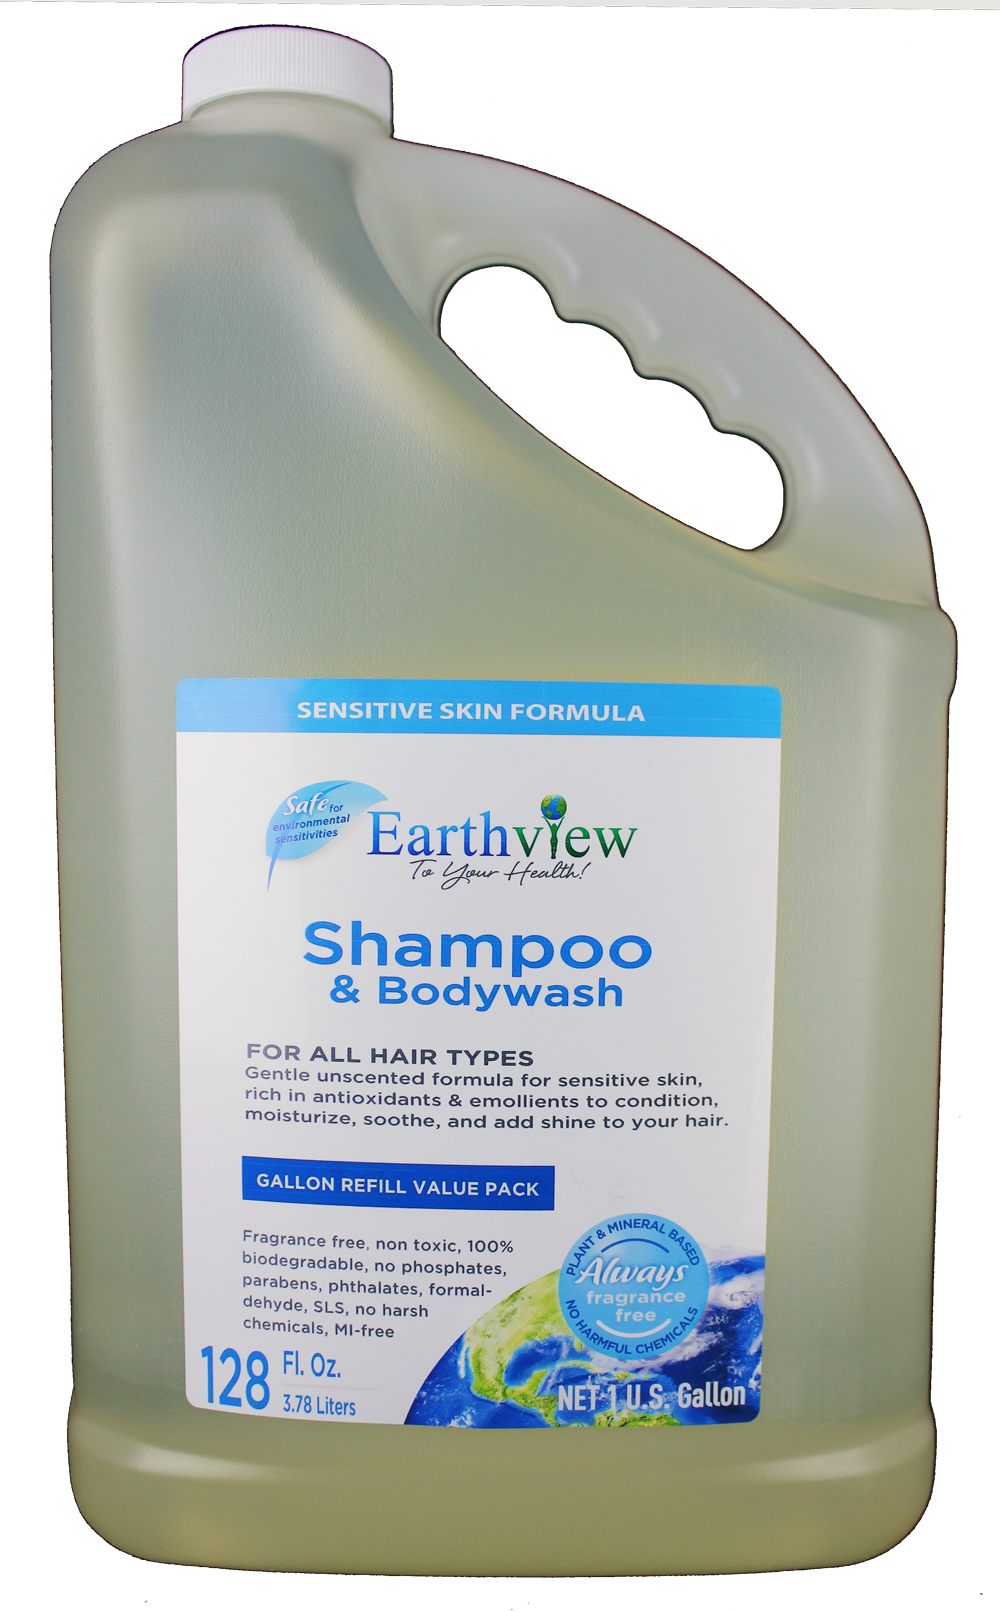 Refill Bathroom Cleaner 128 oz - Earthview Products :Earthview